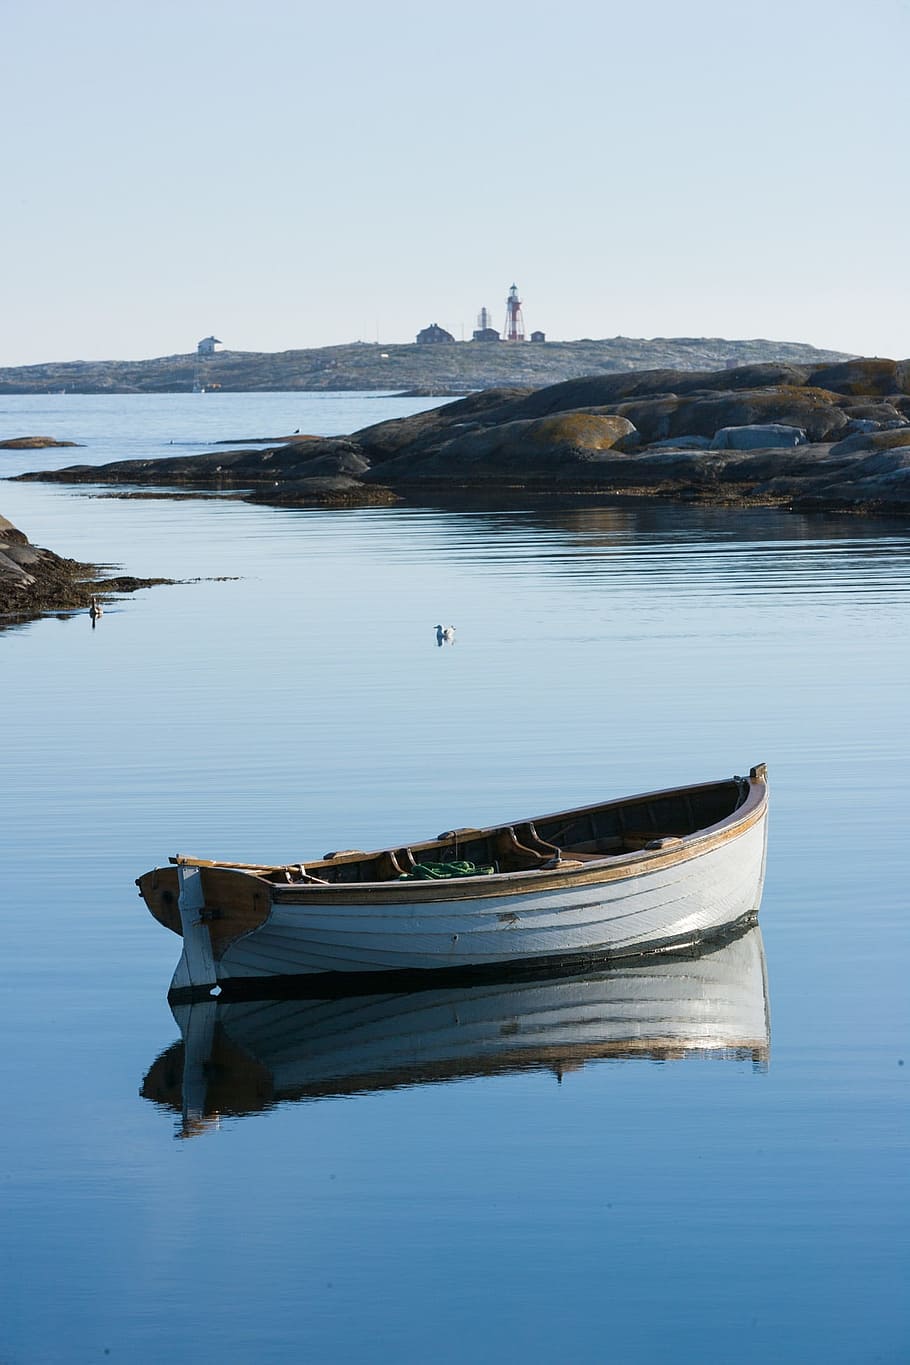 white, rowboat, calm, body, water, sky, daytime, lighthouse, boat, sea